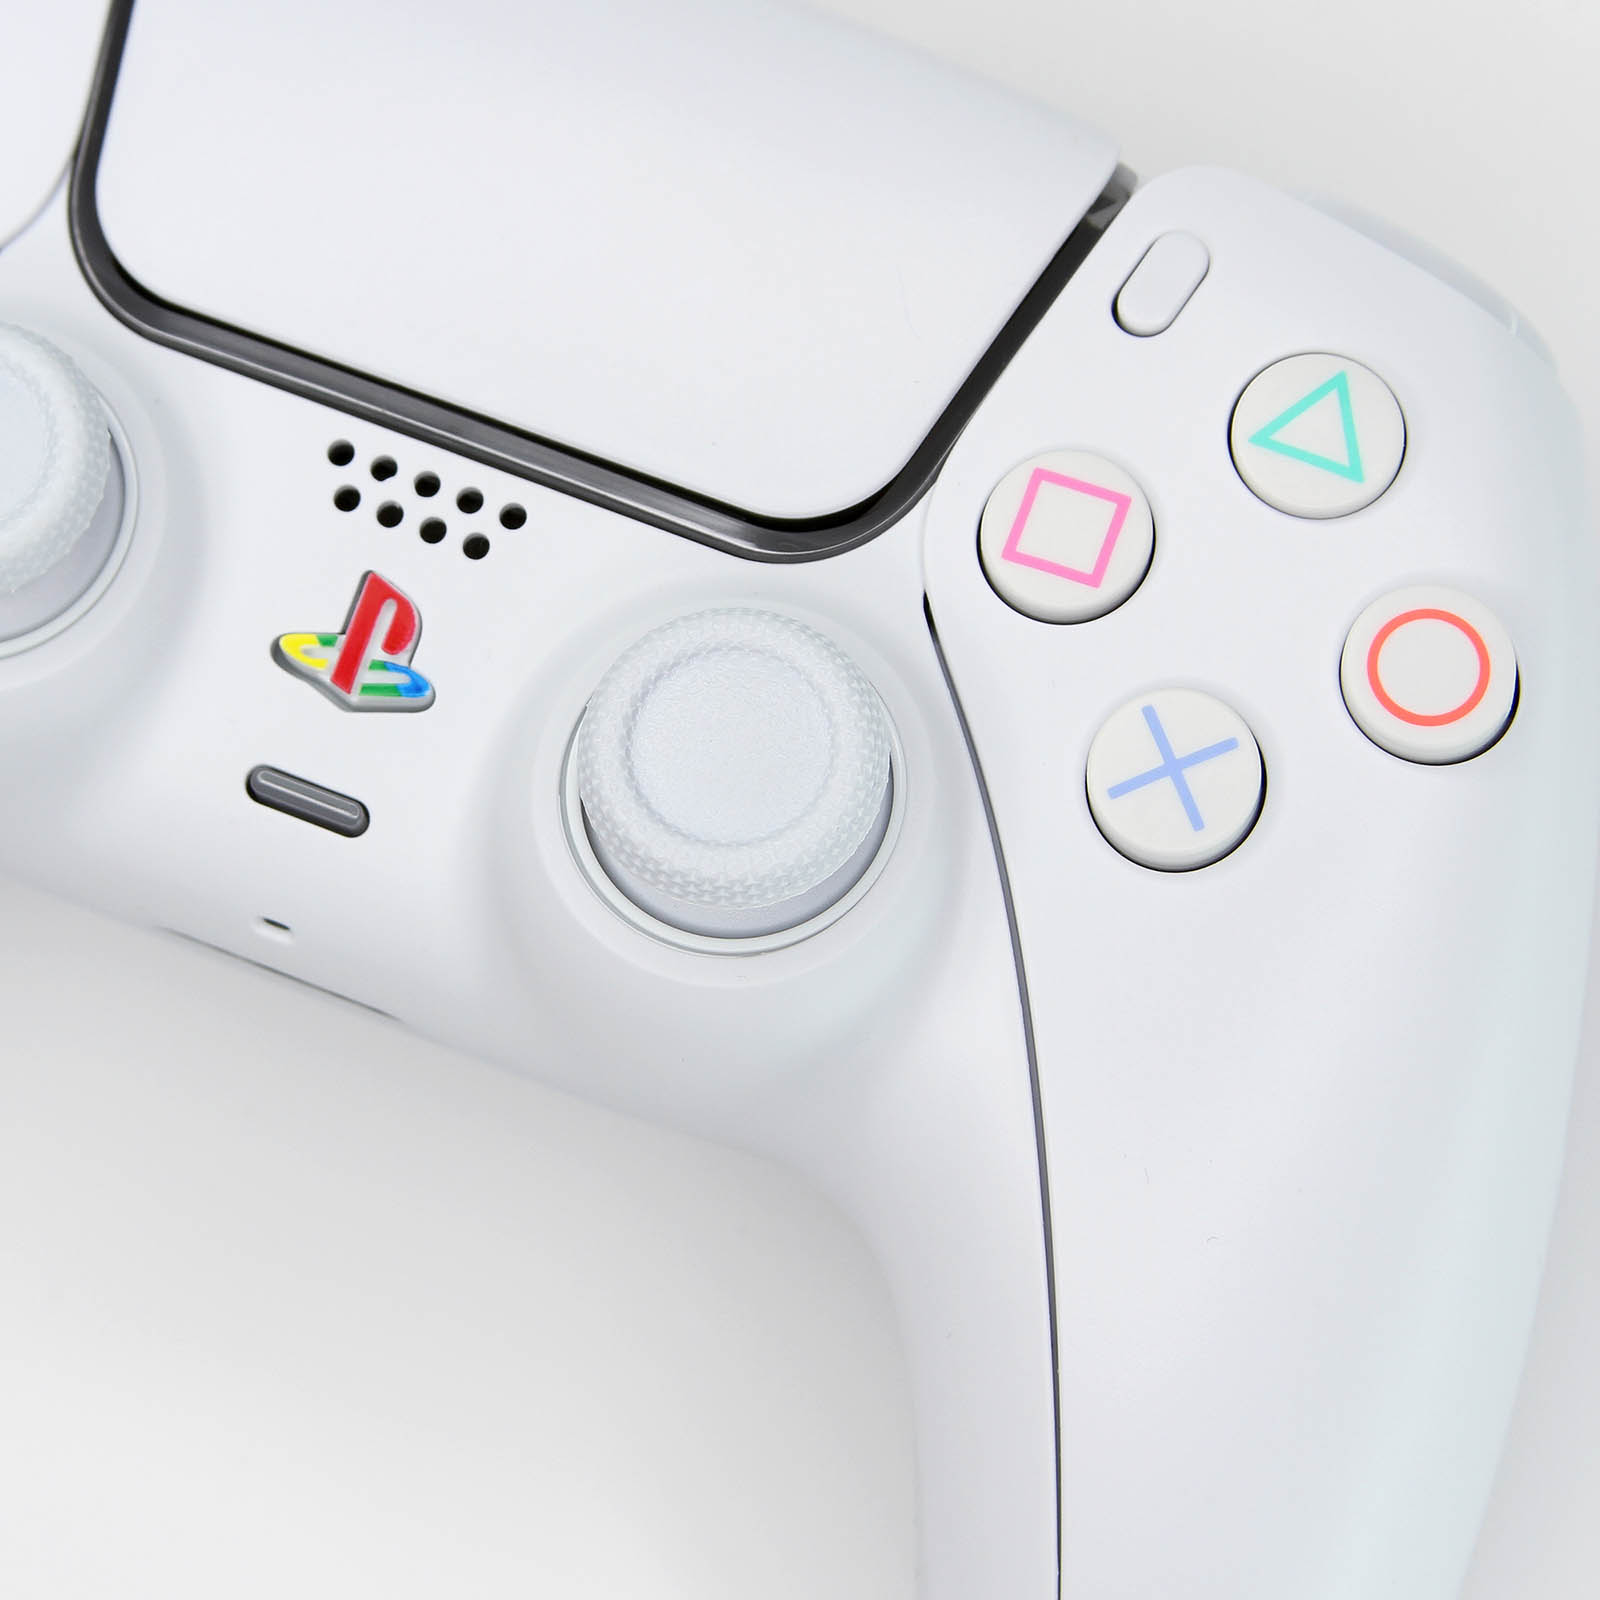 PSone White PS5 Controller